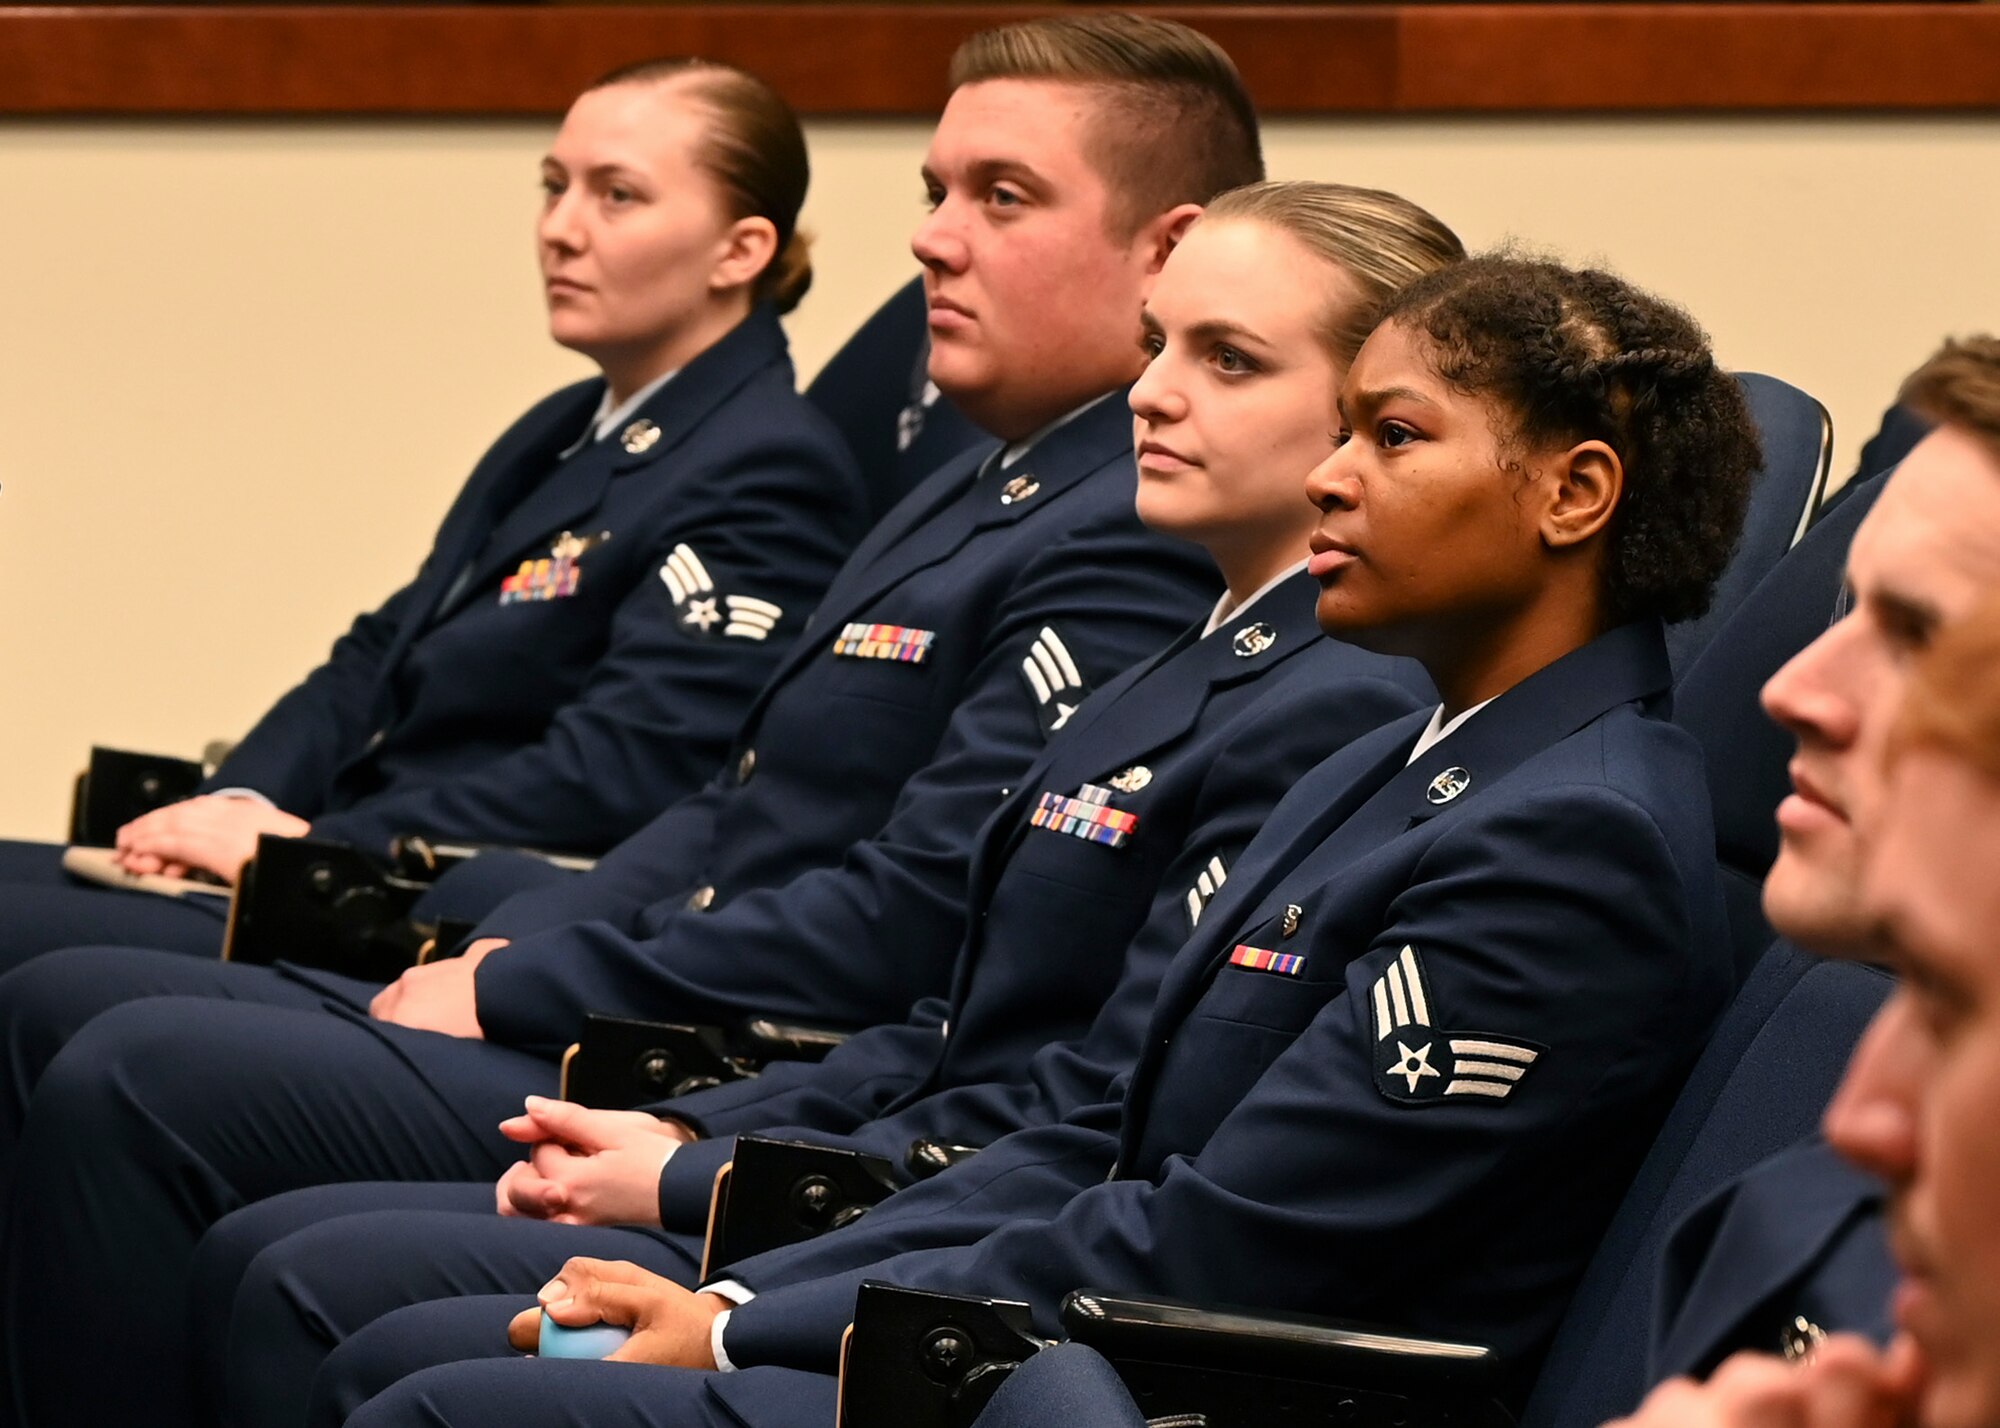 Team McChord Airmen with the Julius A. Kolb Airman Leadership School Class 23-C receive mentorship from Chief Master Sgt. Bickley, 18th Air Force command chief, at Joint Base Lewis-McChord, Washington, March 3, 2023. During Bickley’s visit he spoke with the ALS class, held an all-call with Team McChord, and spoke at the Chief Recognition Ceremony. (U.S. Air Force Senior Airman Callie Norton)